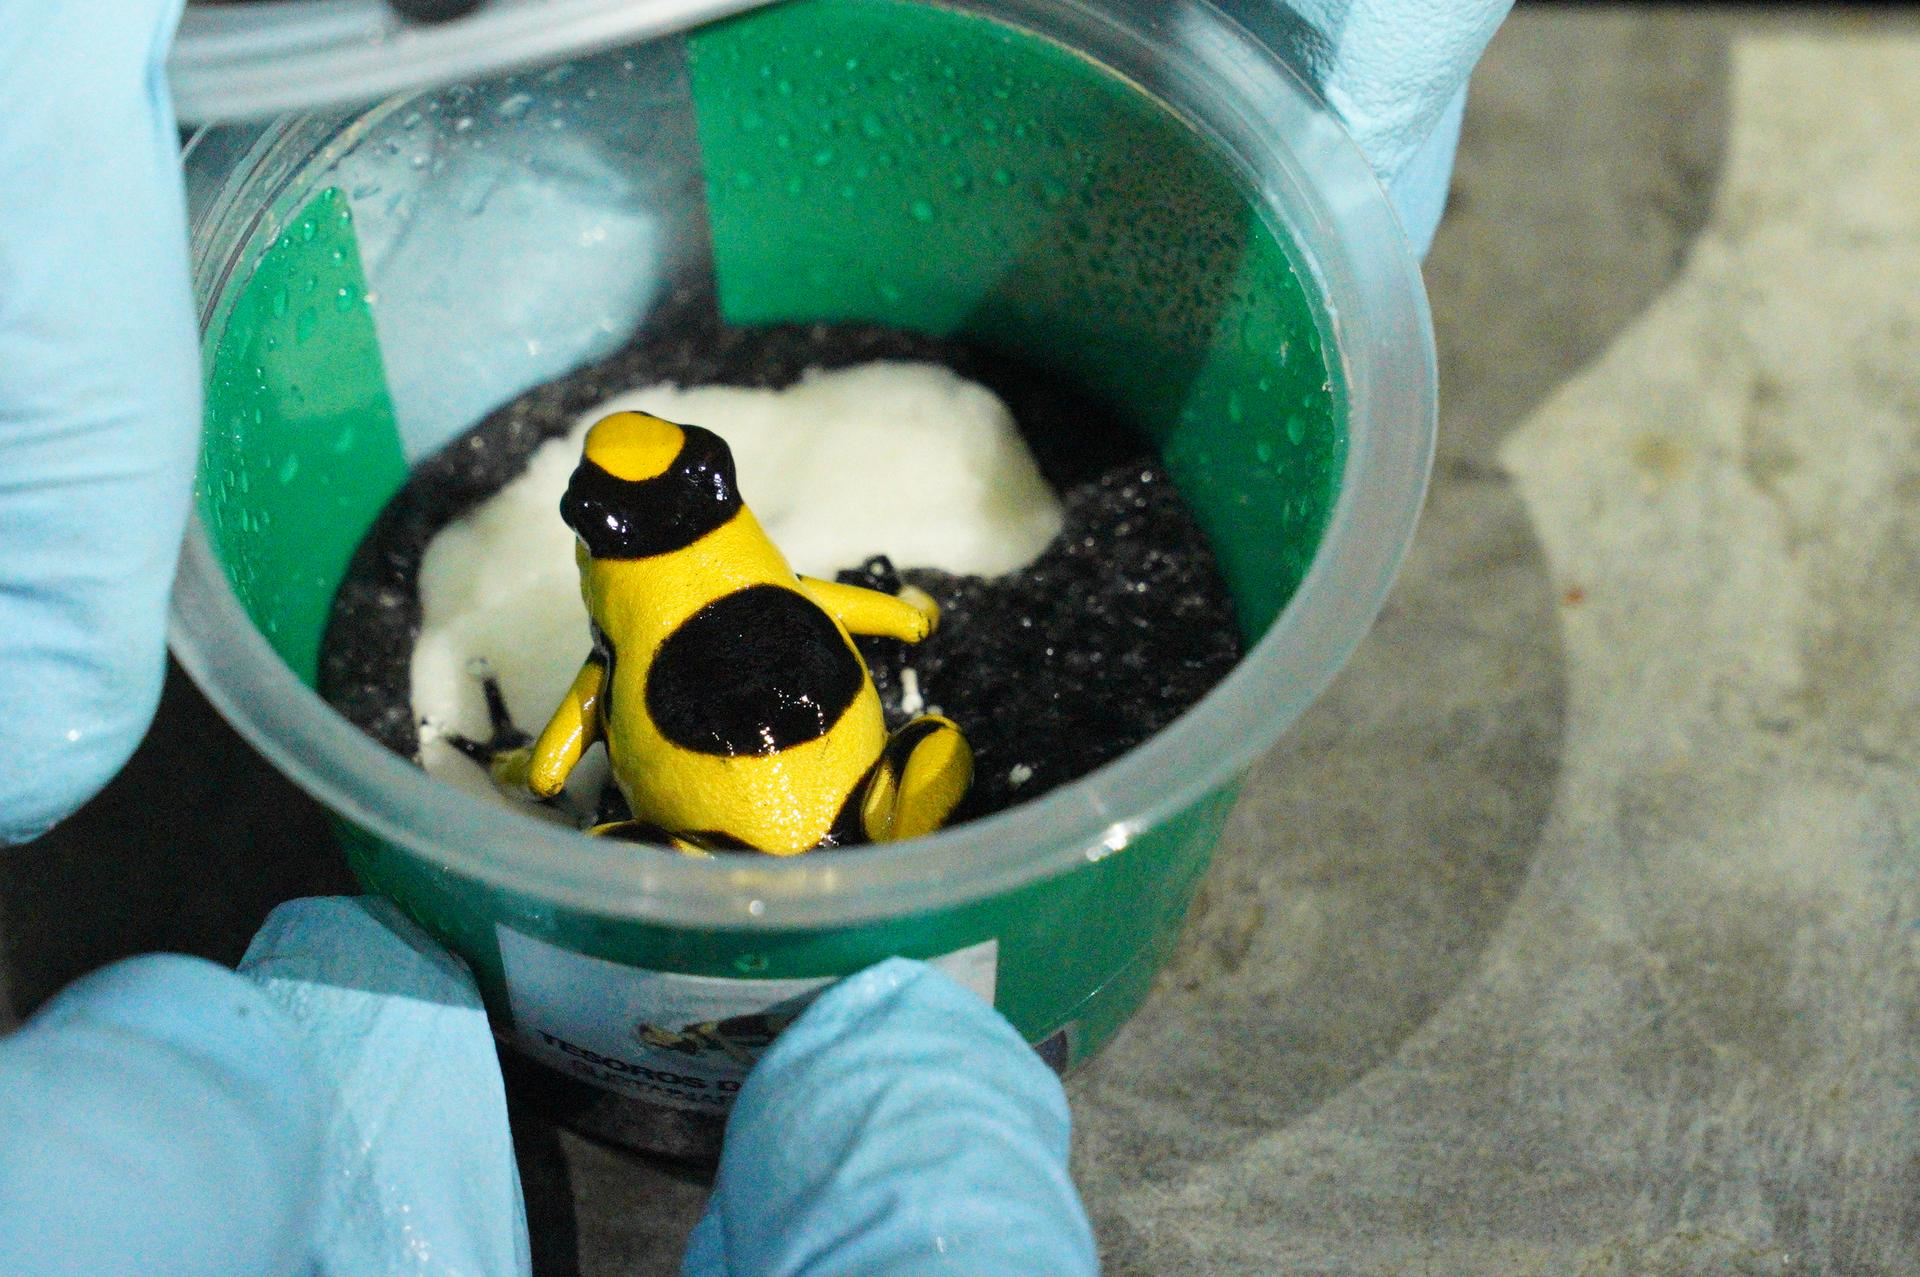 A yellow frog with black dots in a plastic cup